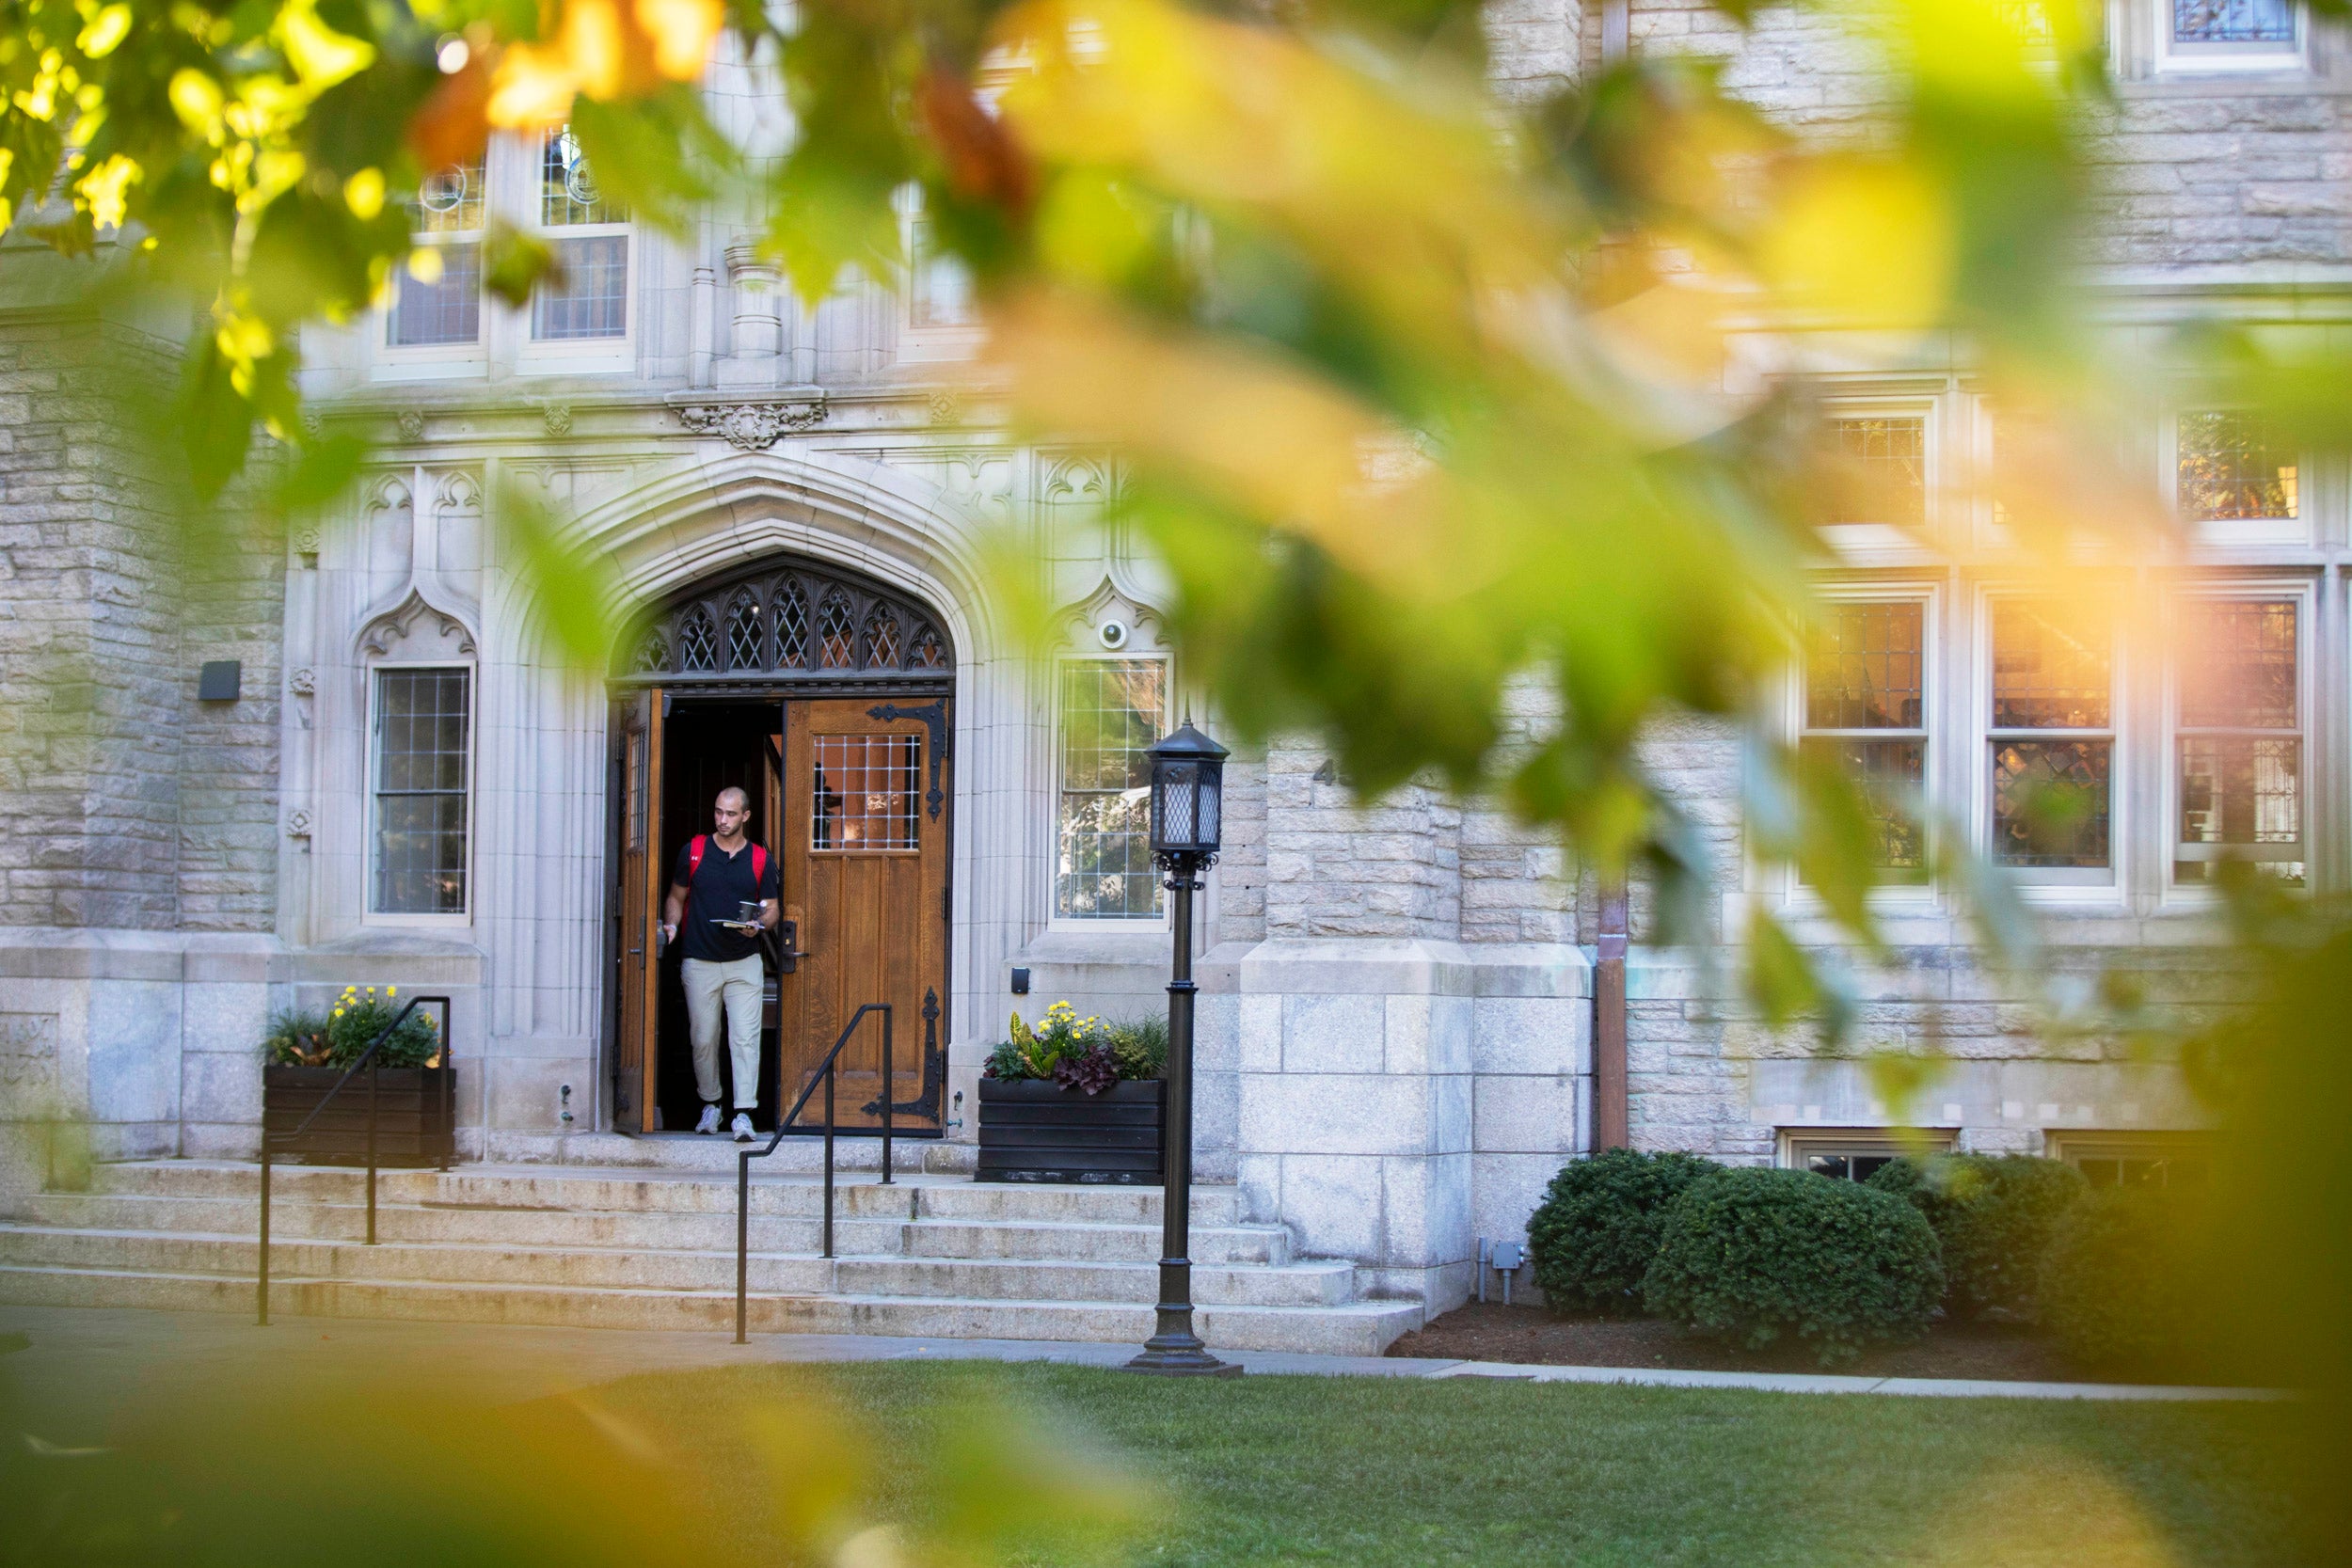 Sunlit foliage frames the entrance to Swartz Hall at the Divinity School.